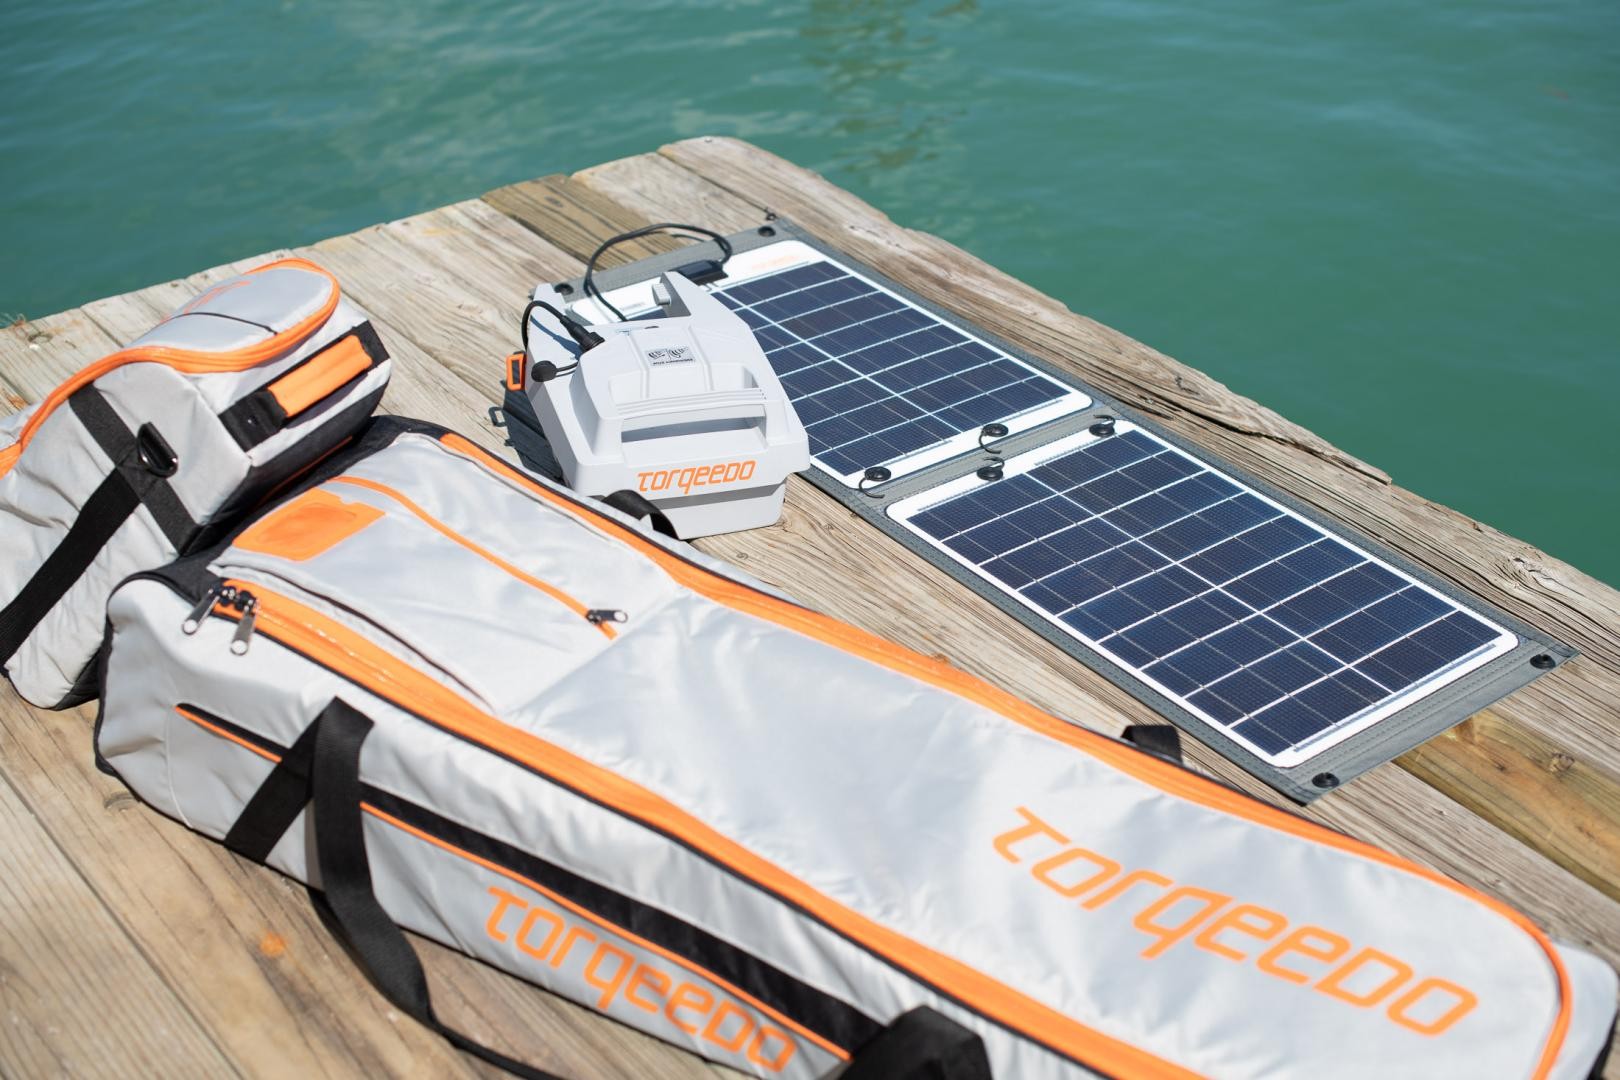 Torqeedo's ultra-quiet new electric outboard